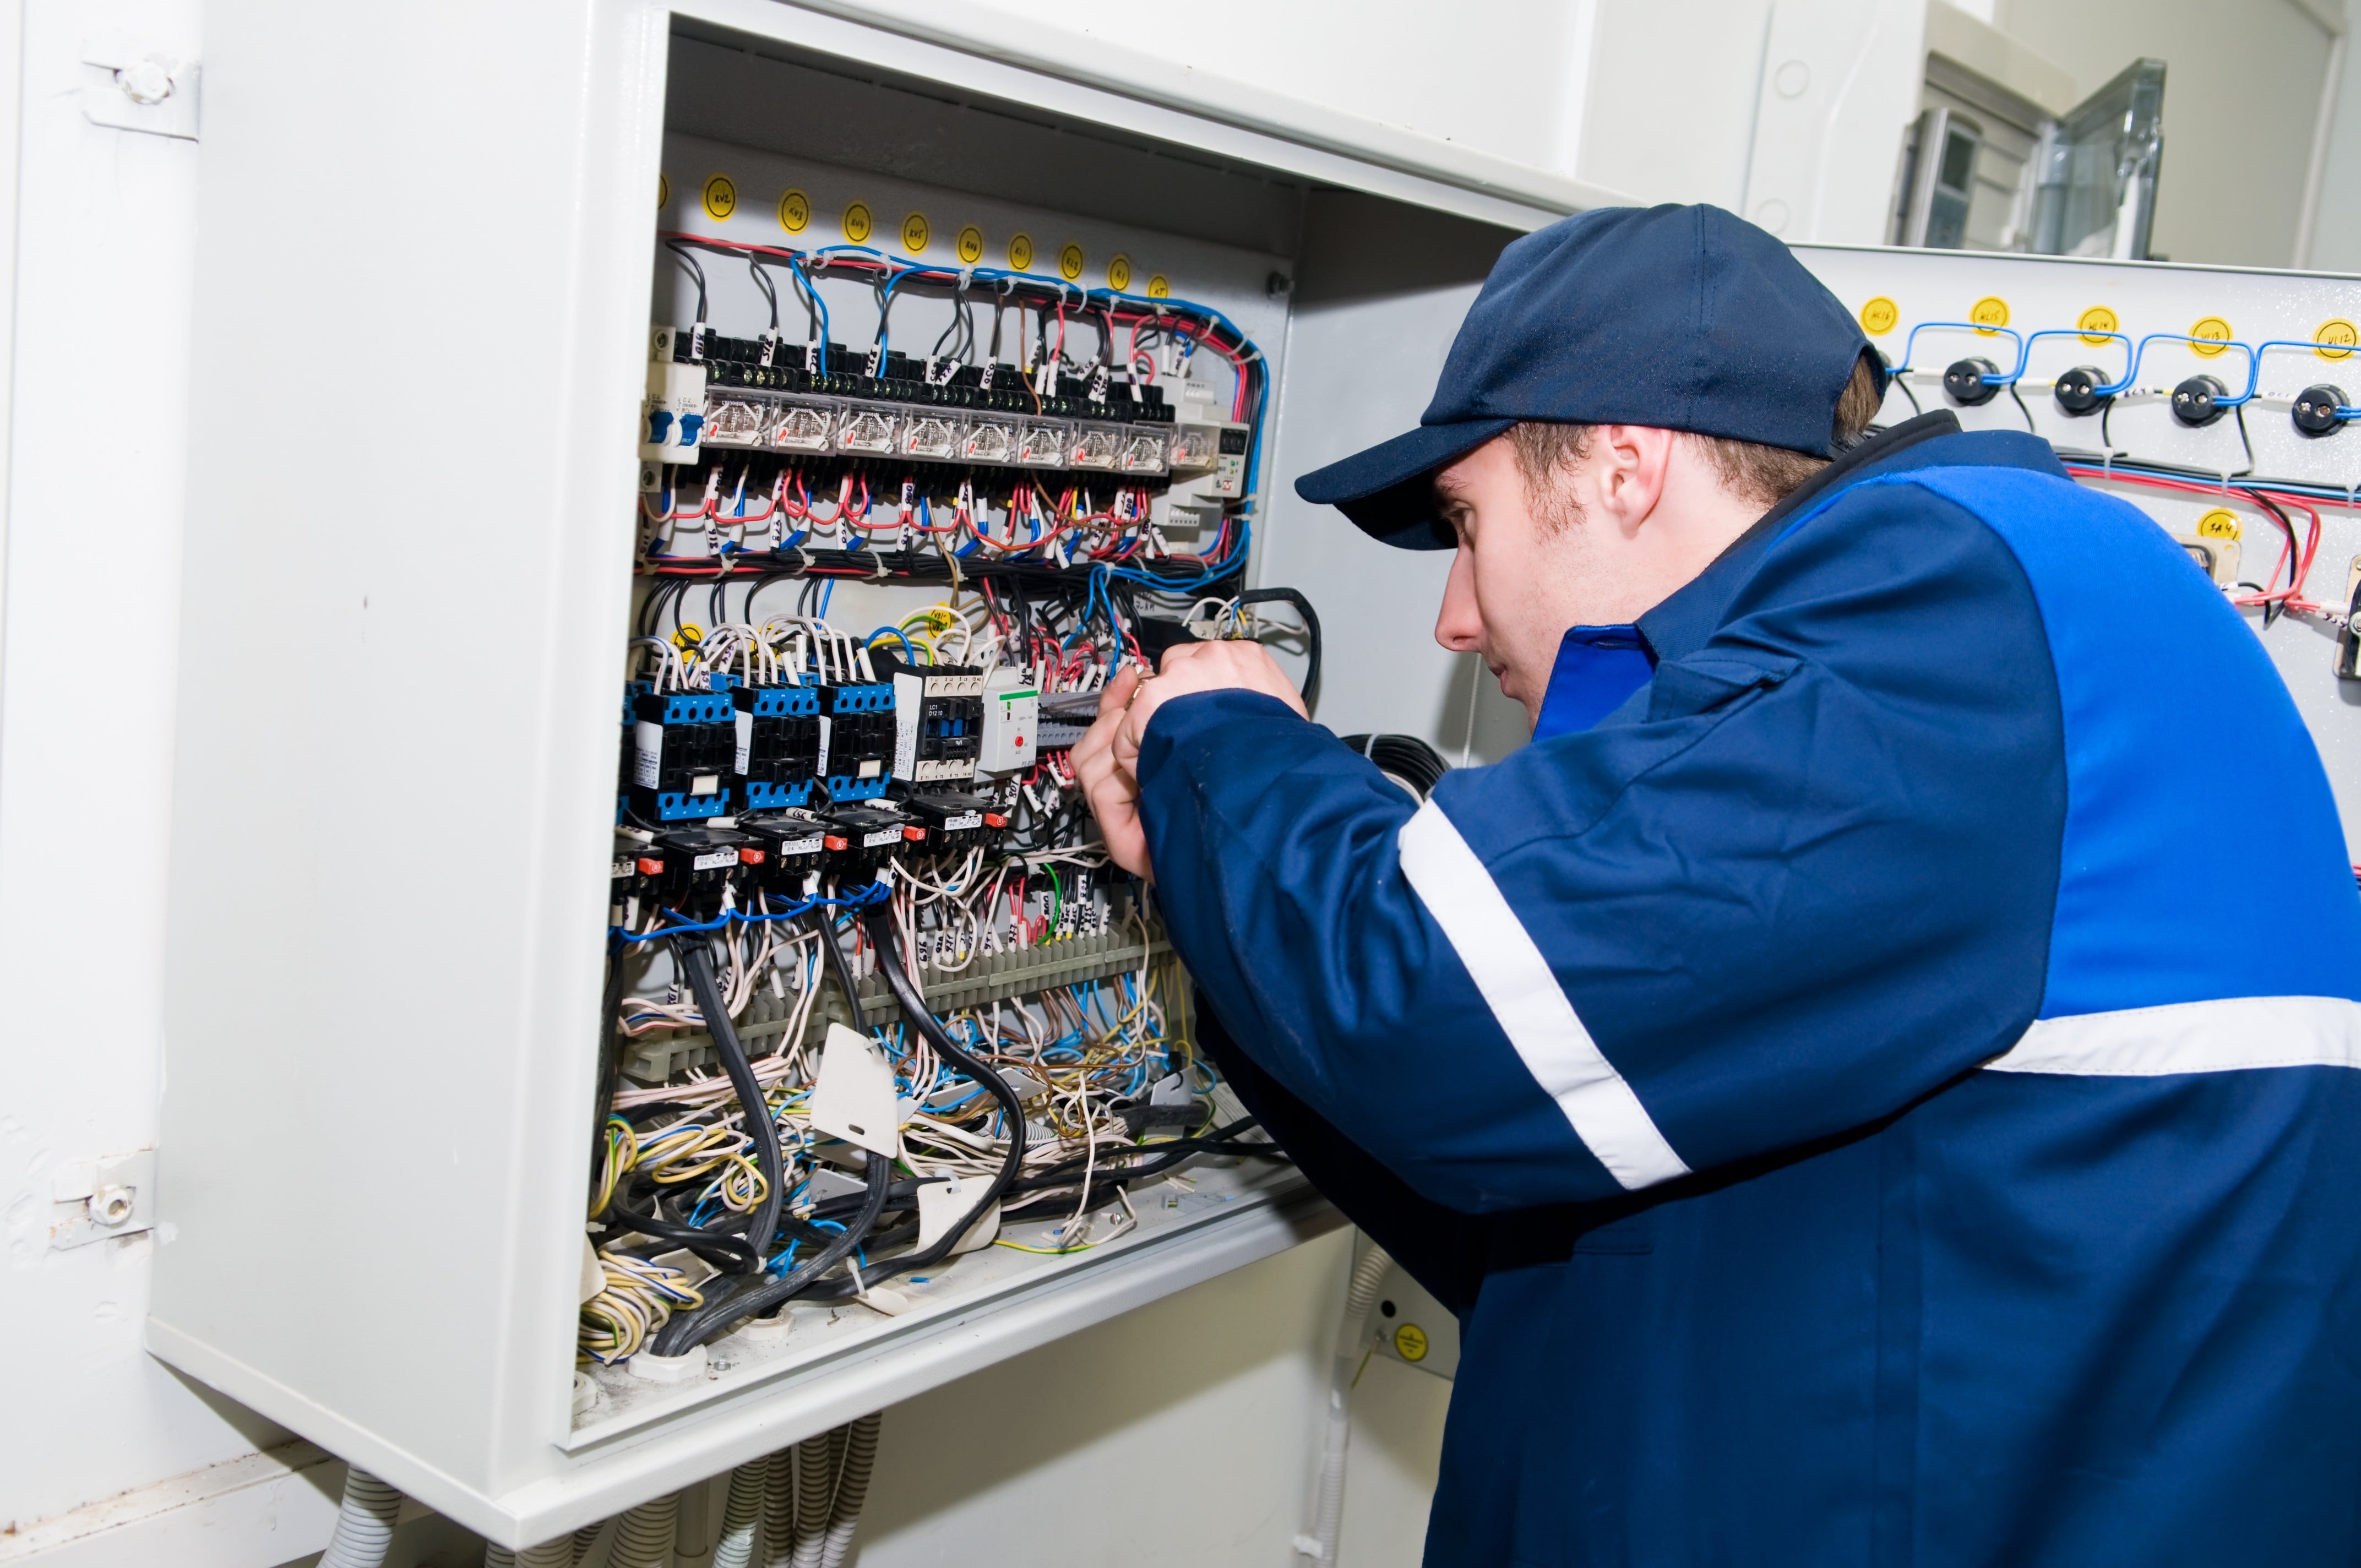 One Electrician Working On A Industrial Panel